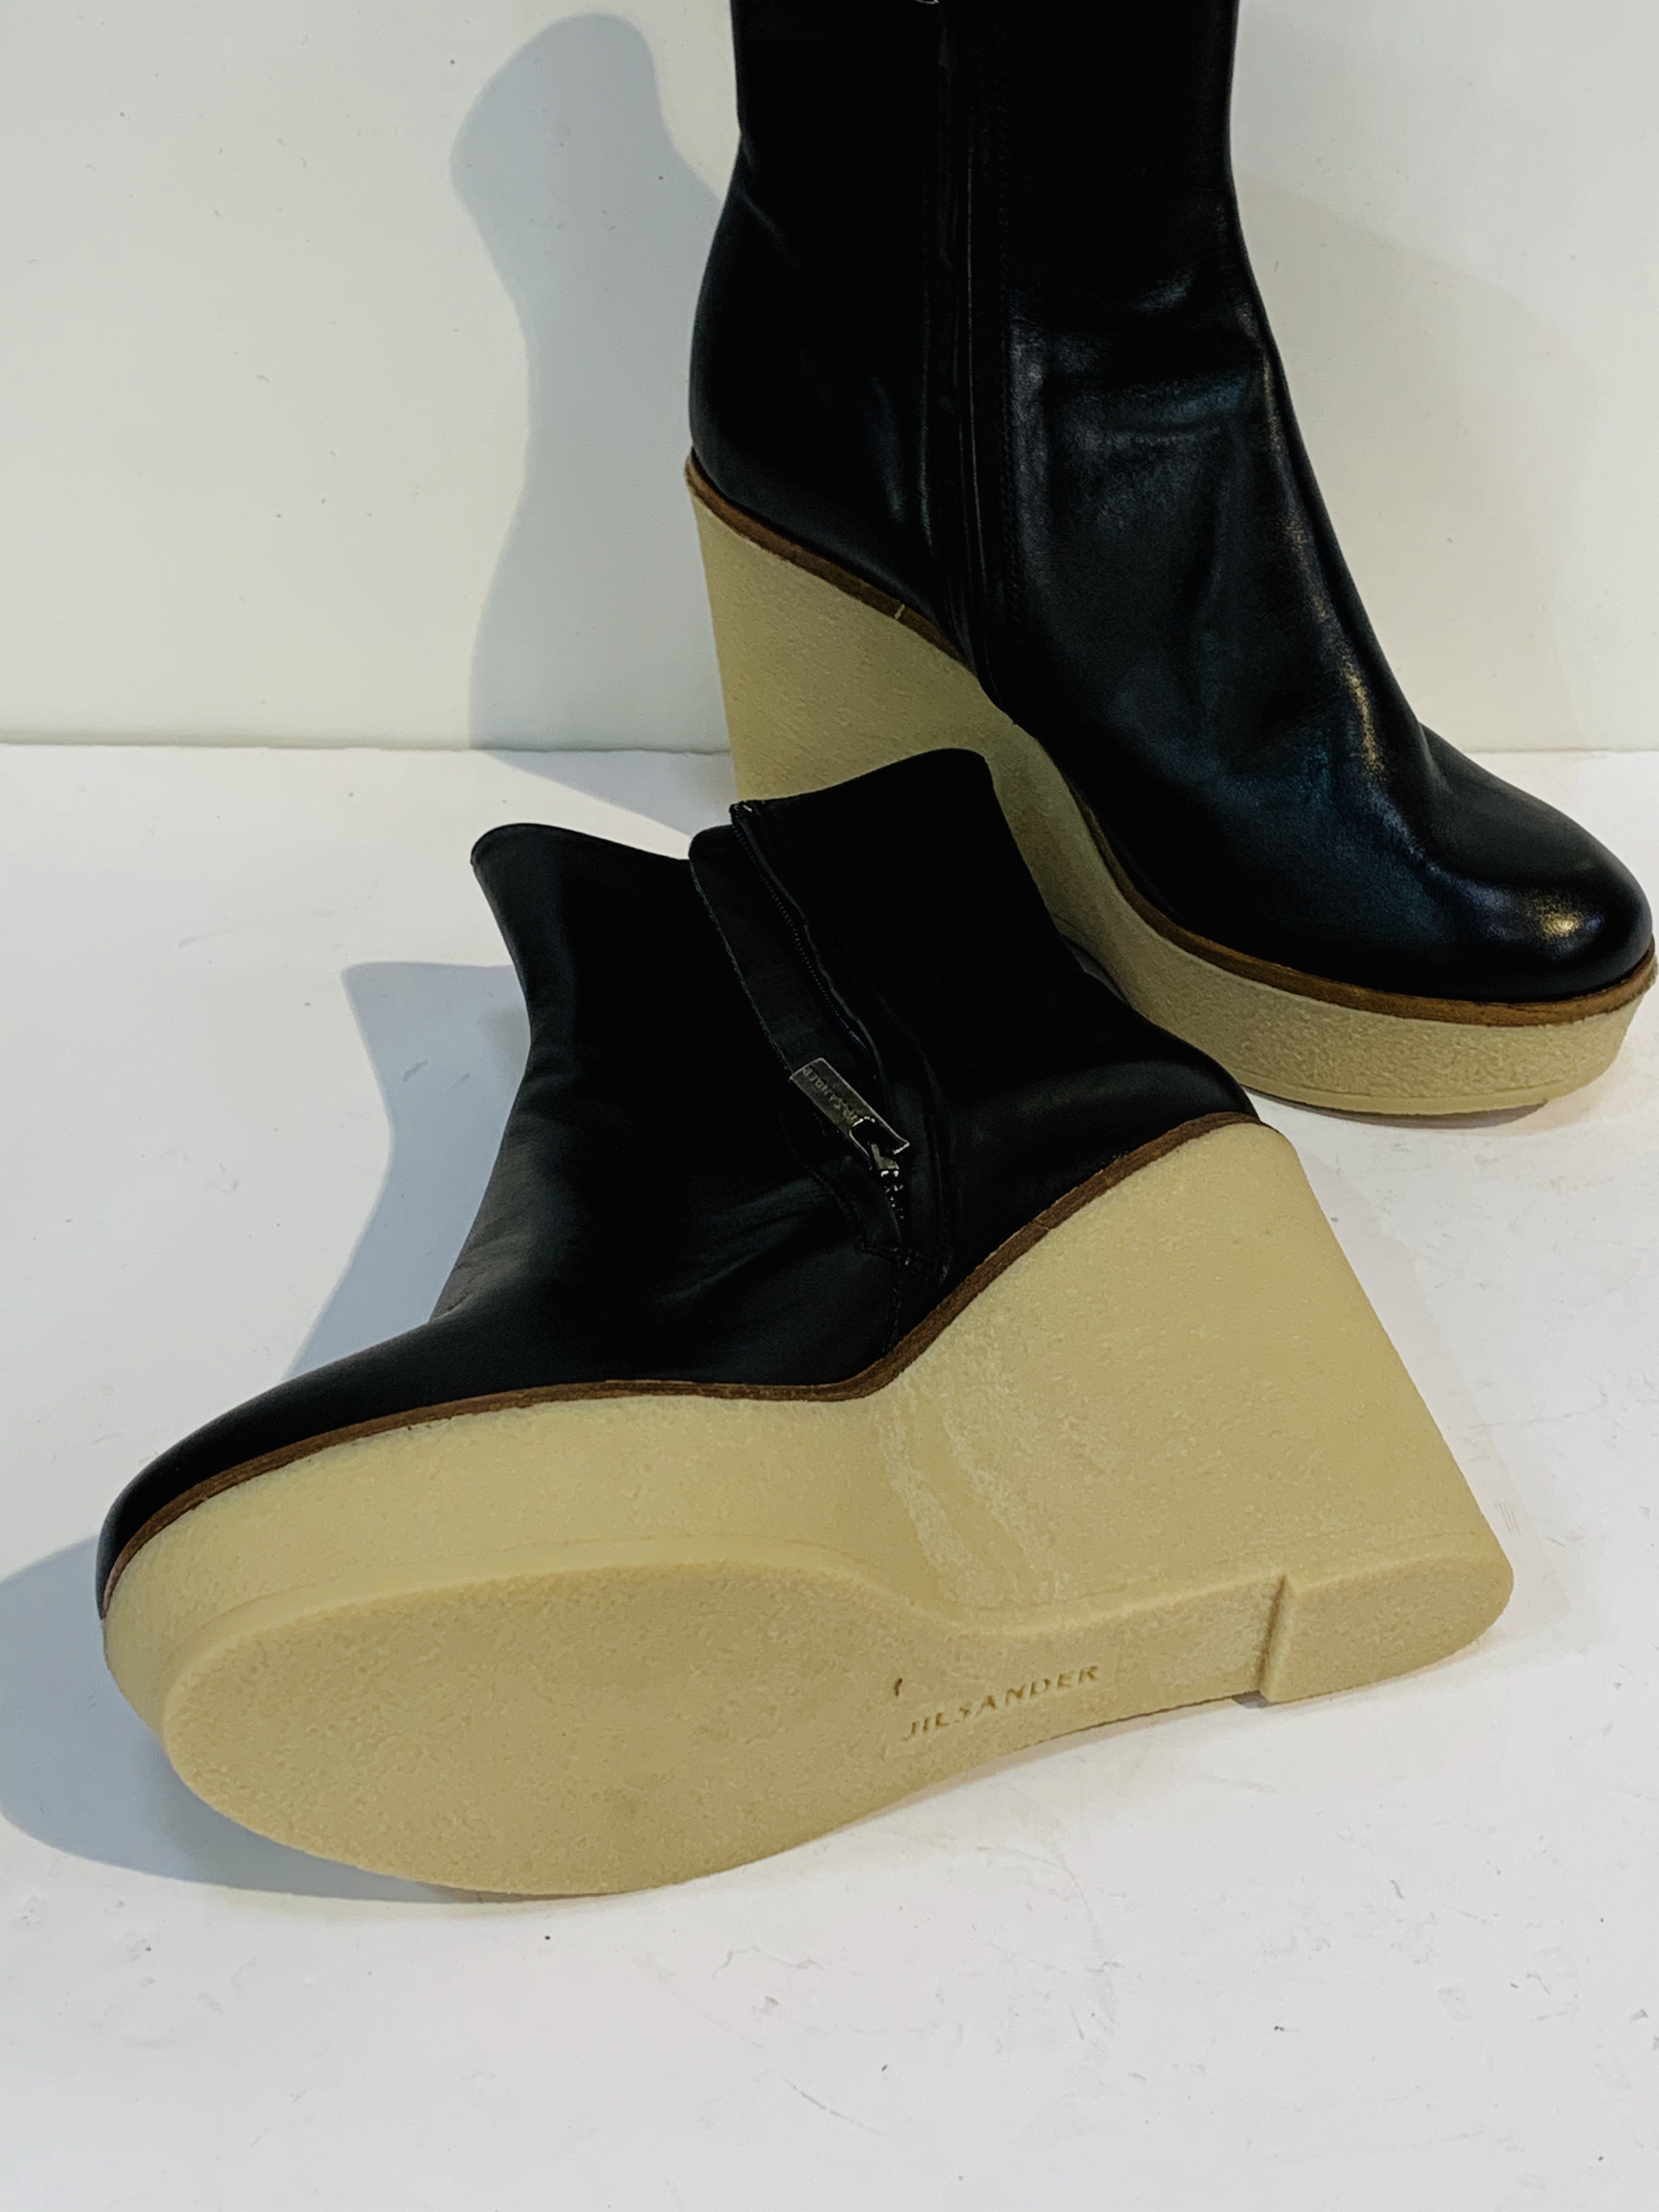 Authentic JIL SANDER crepe wedge ankle boots, size 37 1/2. New in Original Packing. - Image 2 of 2